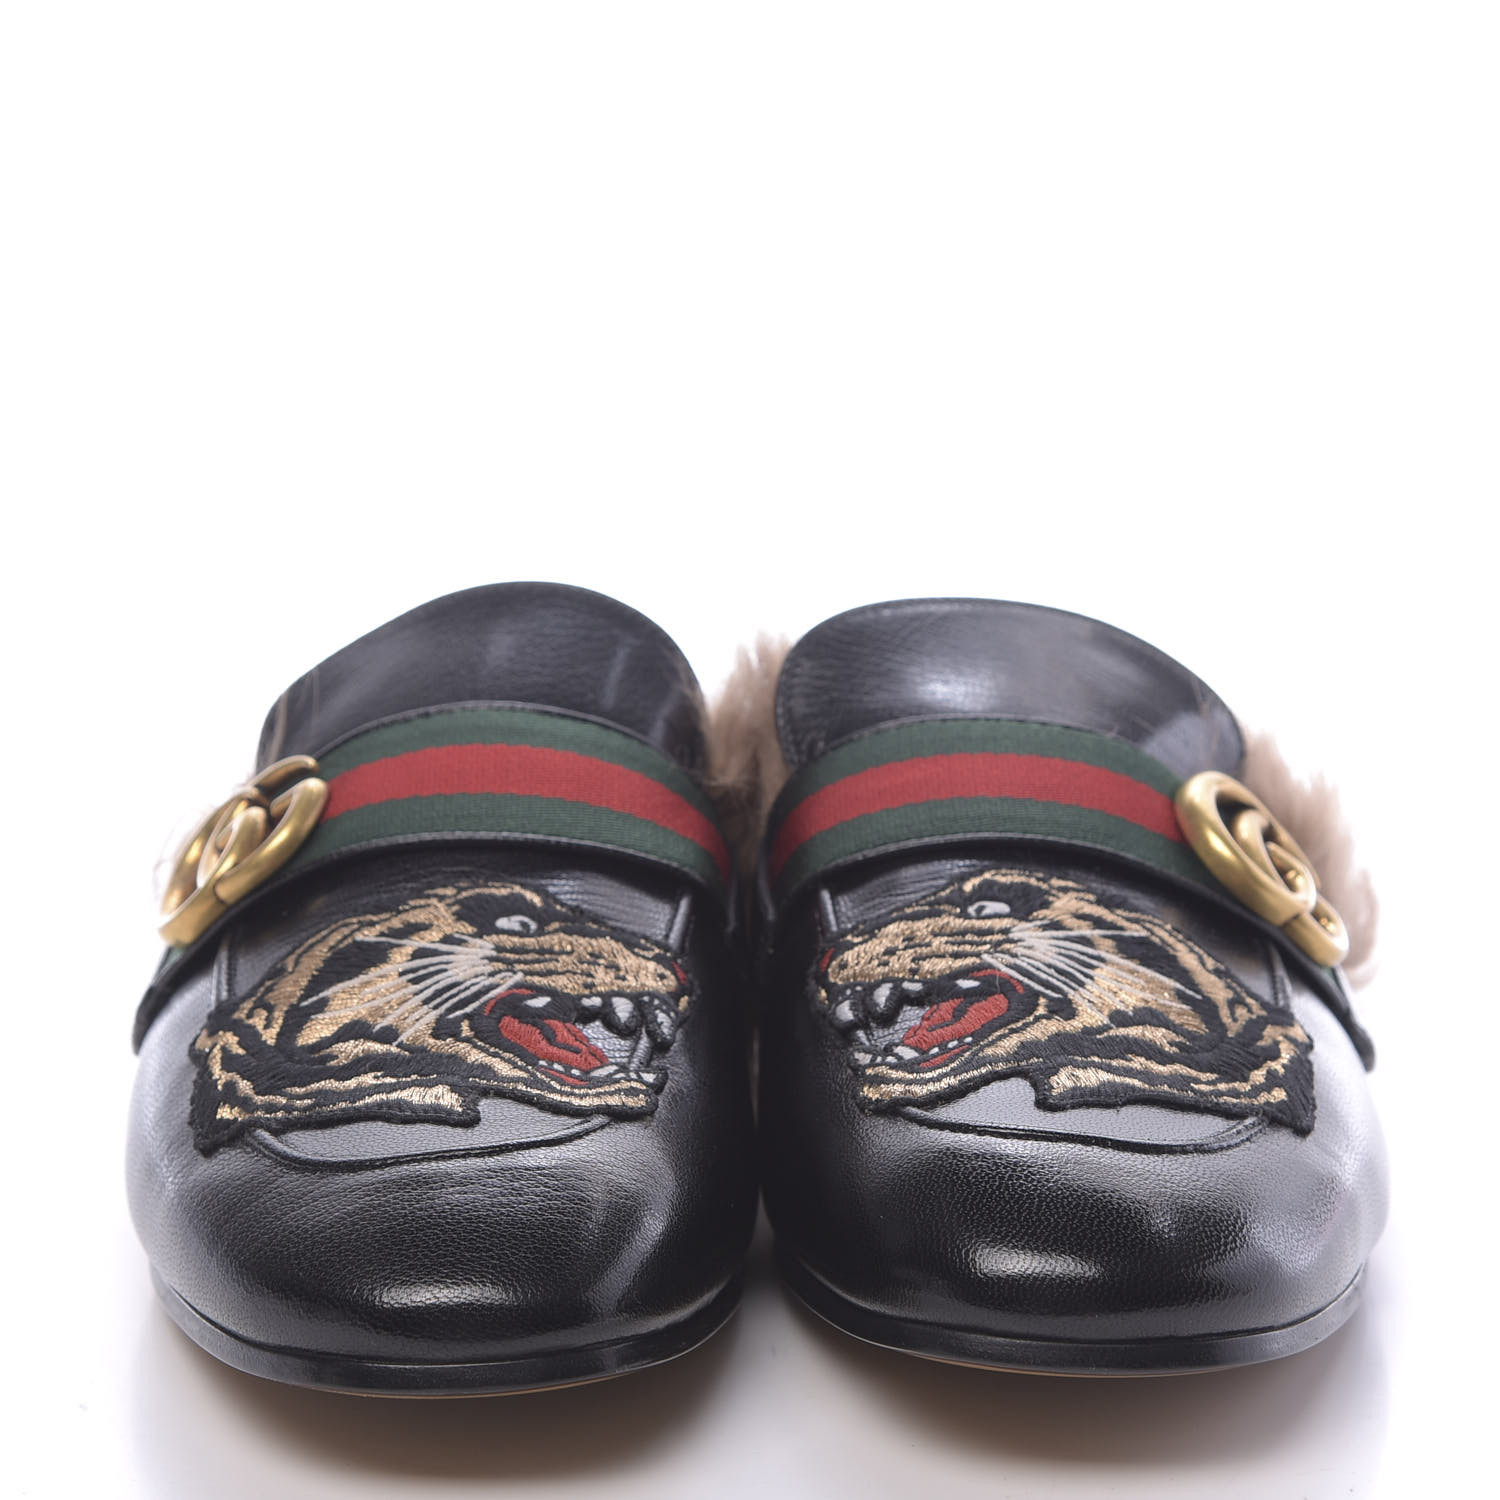 GUCCI Calfskin Fur Web GG Tiger Embroidered Mens Princetown Slippers 8 ...